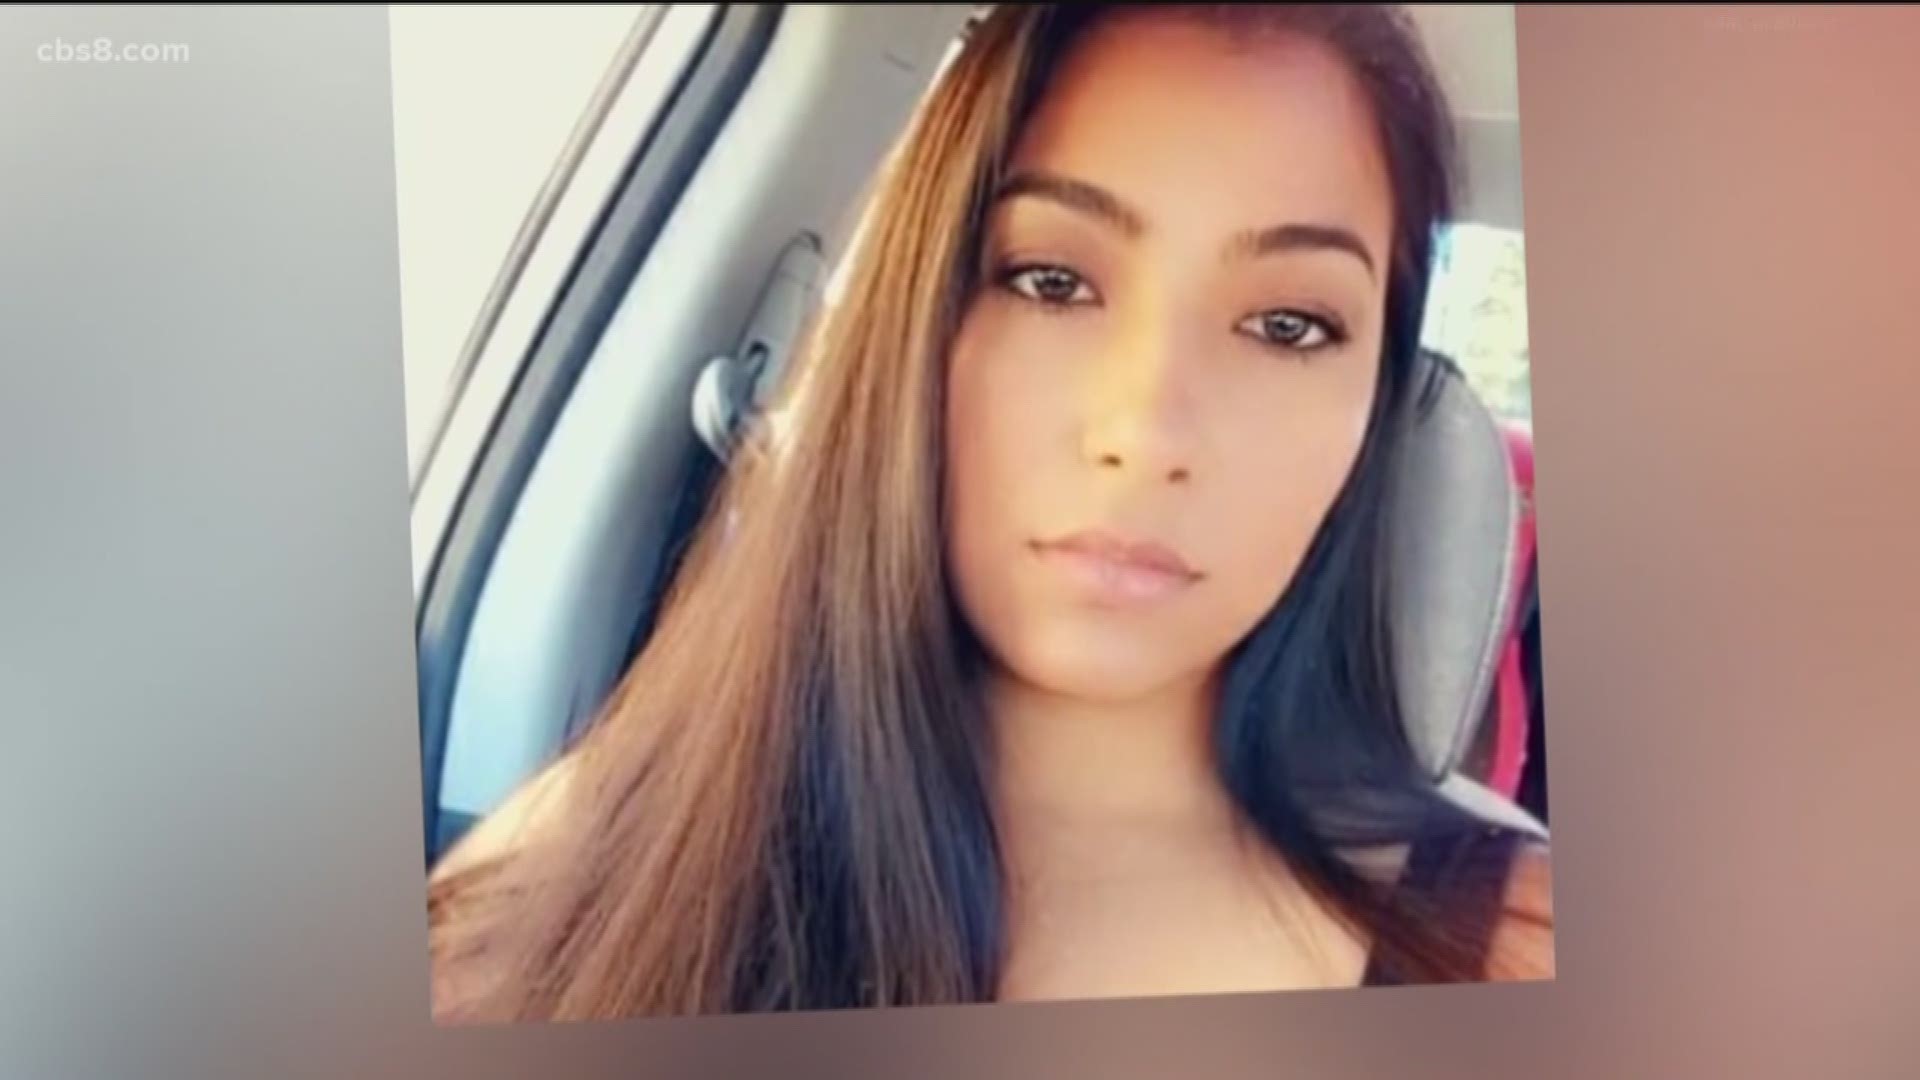 On Nov. 6, court documents state Jose Valdivia sent Sabrina Rosario "a photo of a handgun displayed in front of several beer cans and a bottle of alcohol."